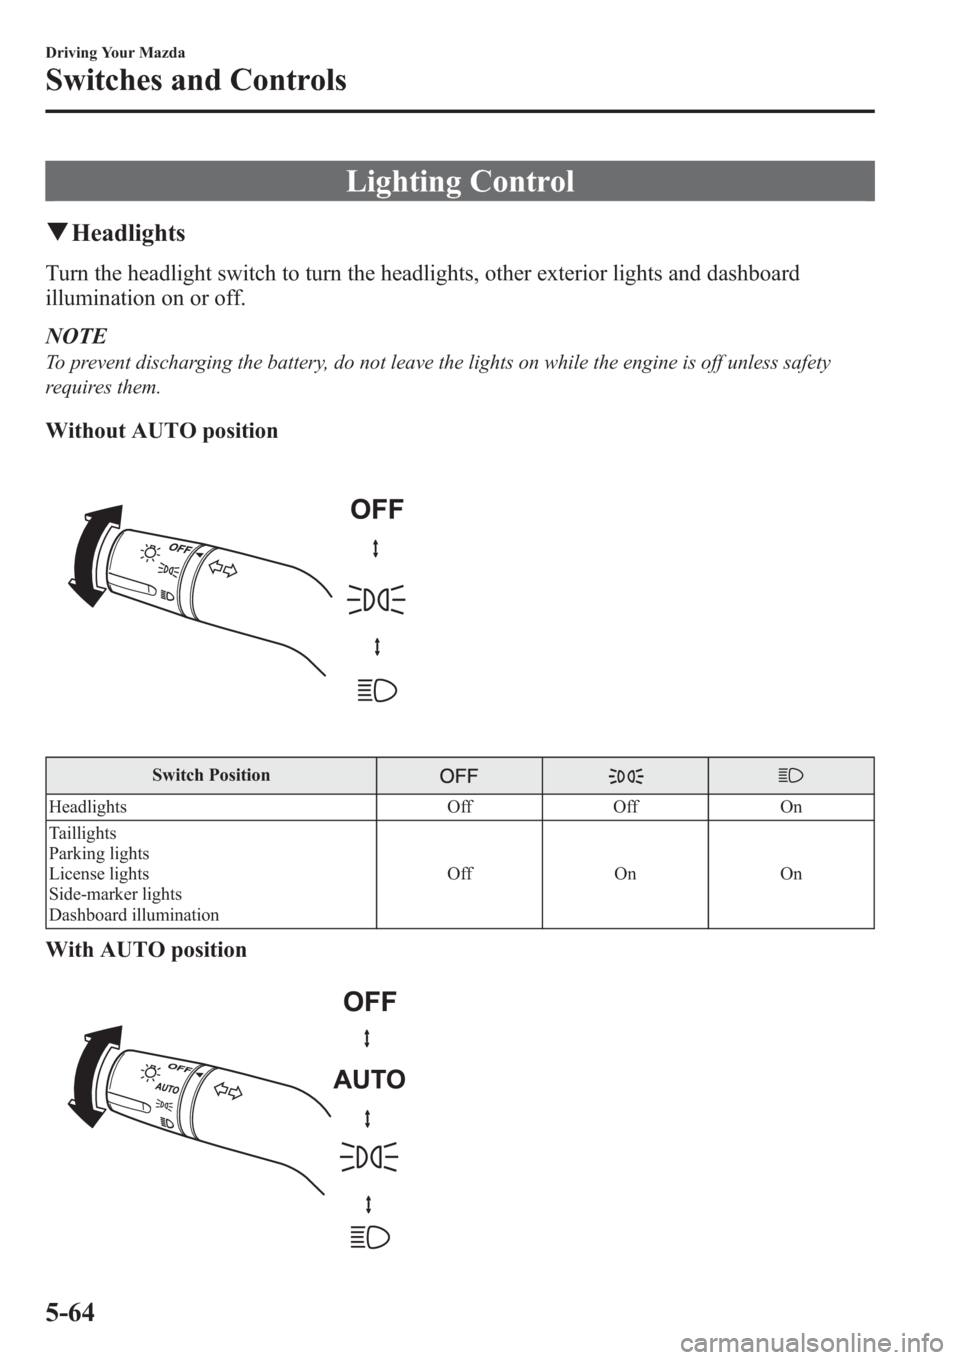 MAZDA MODEL 3 HATCHBACK 2013  Owners Manual (in English) Lighting Control
qHeadlights
Turn the headlight switch to turn the headlights, other exterior lights and dashboard
illumination on or off.
NOTE
To prevent discharging the battery, do not leave the lig